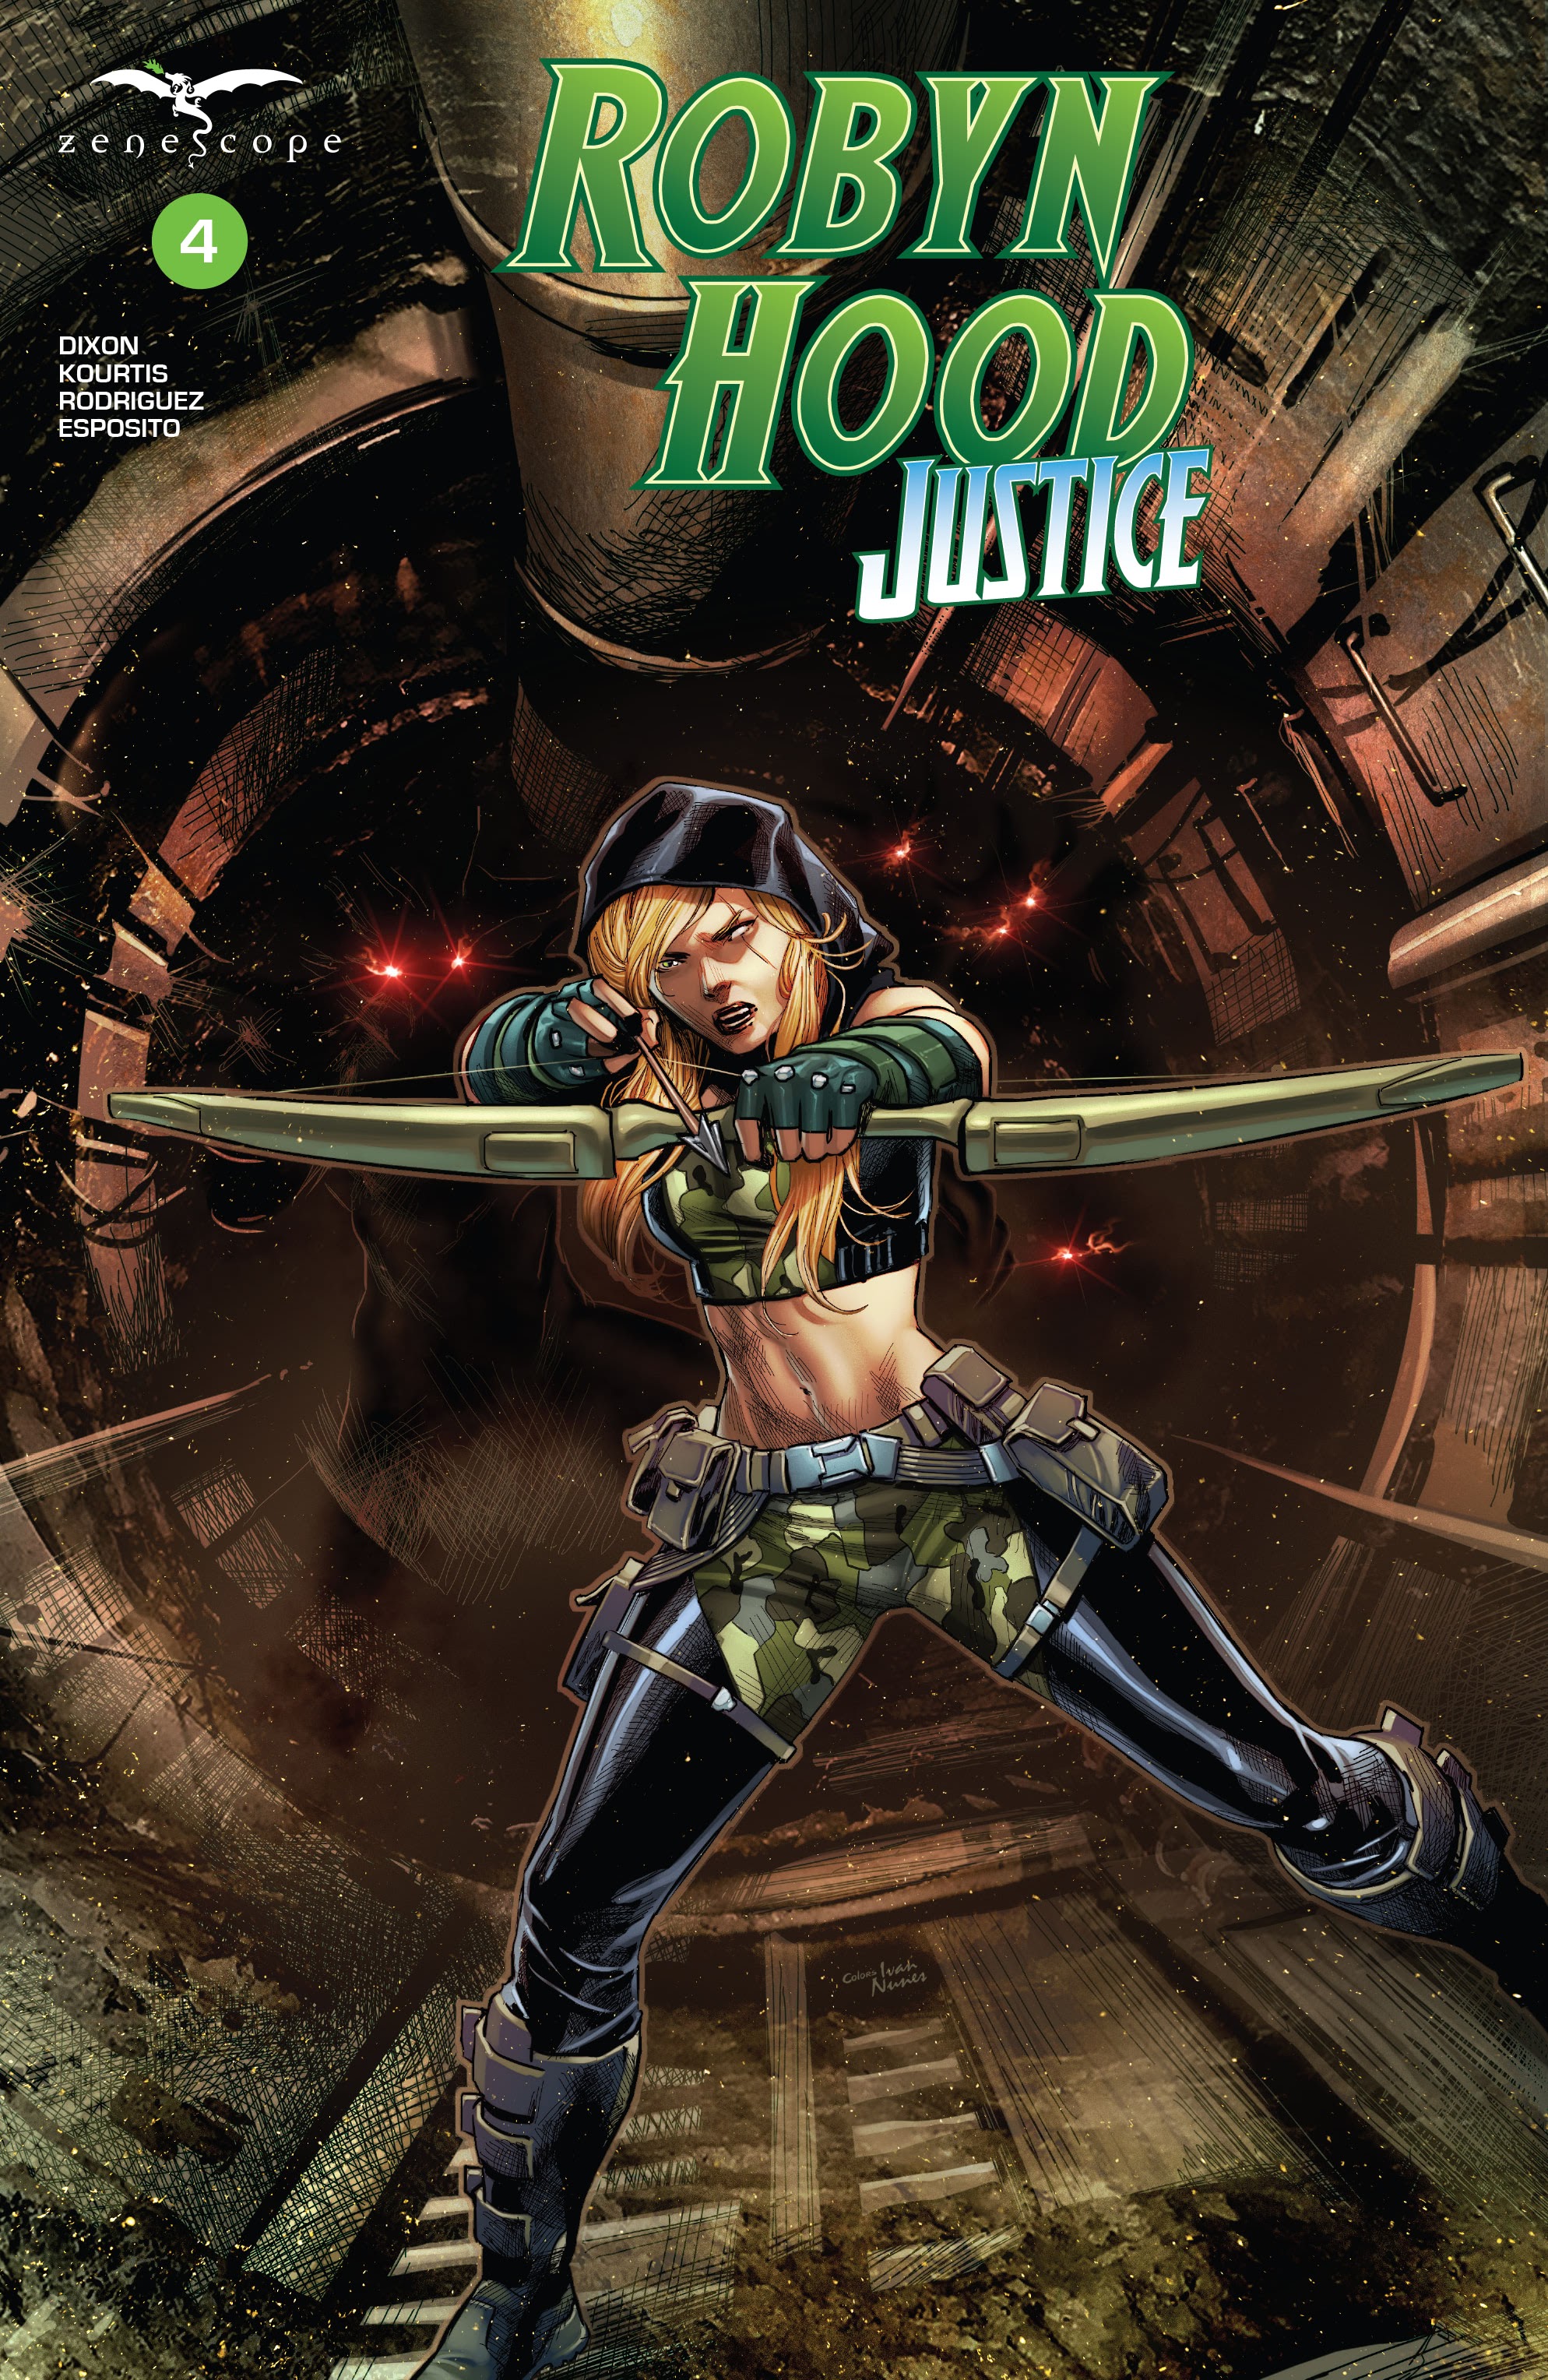 Read online Robyn Hood: Justice comic -  Issue #4 - 1